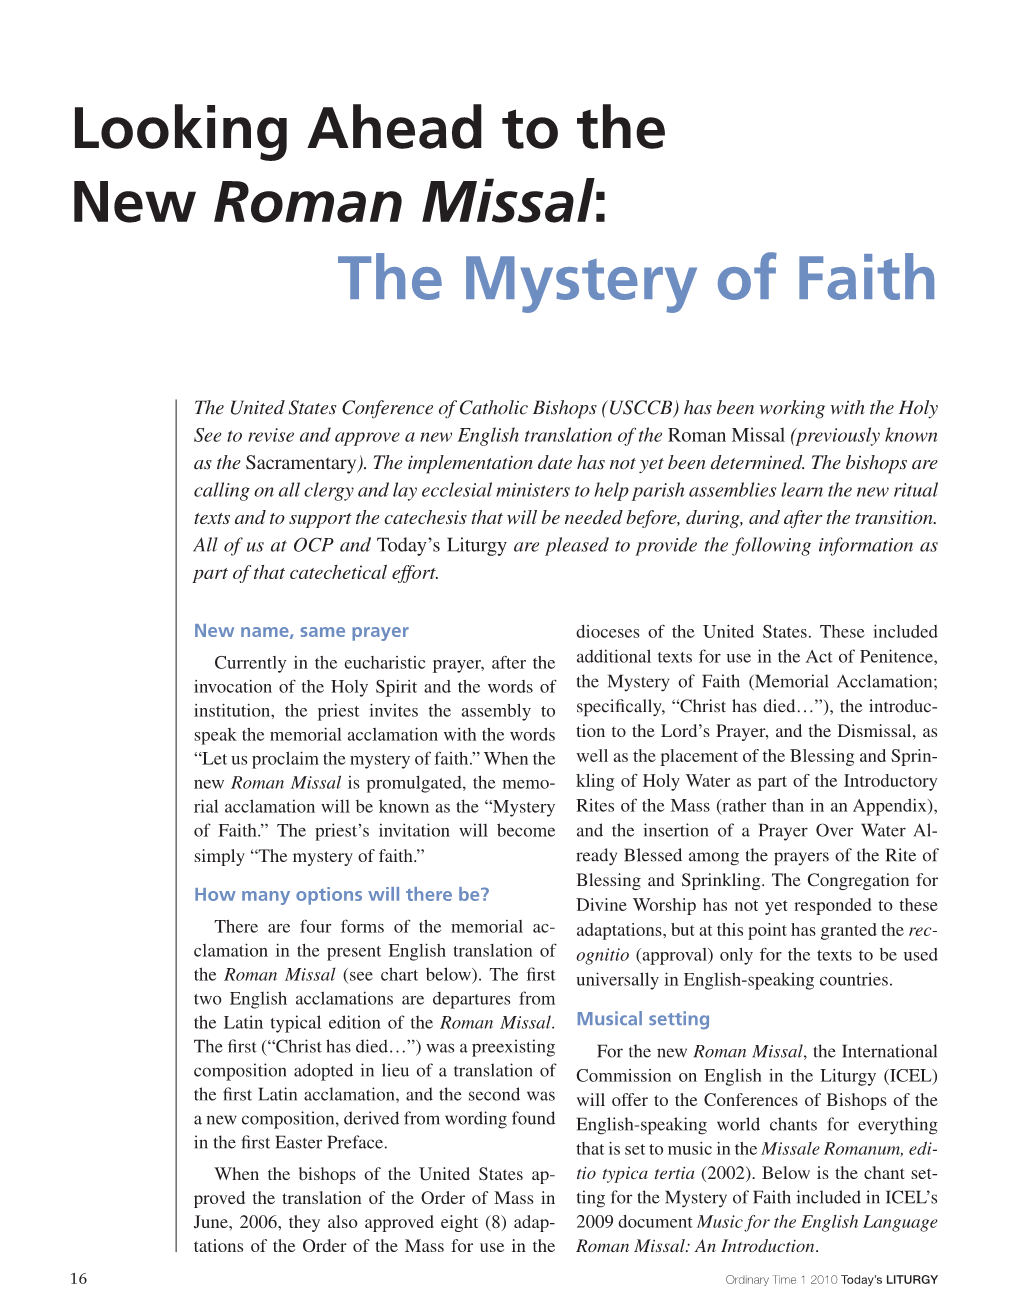 Looking Ahead to the New Roman Missal: the Mystery of Faith